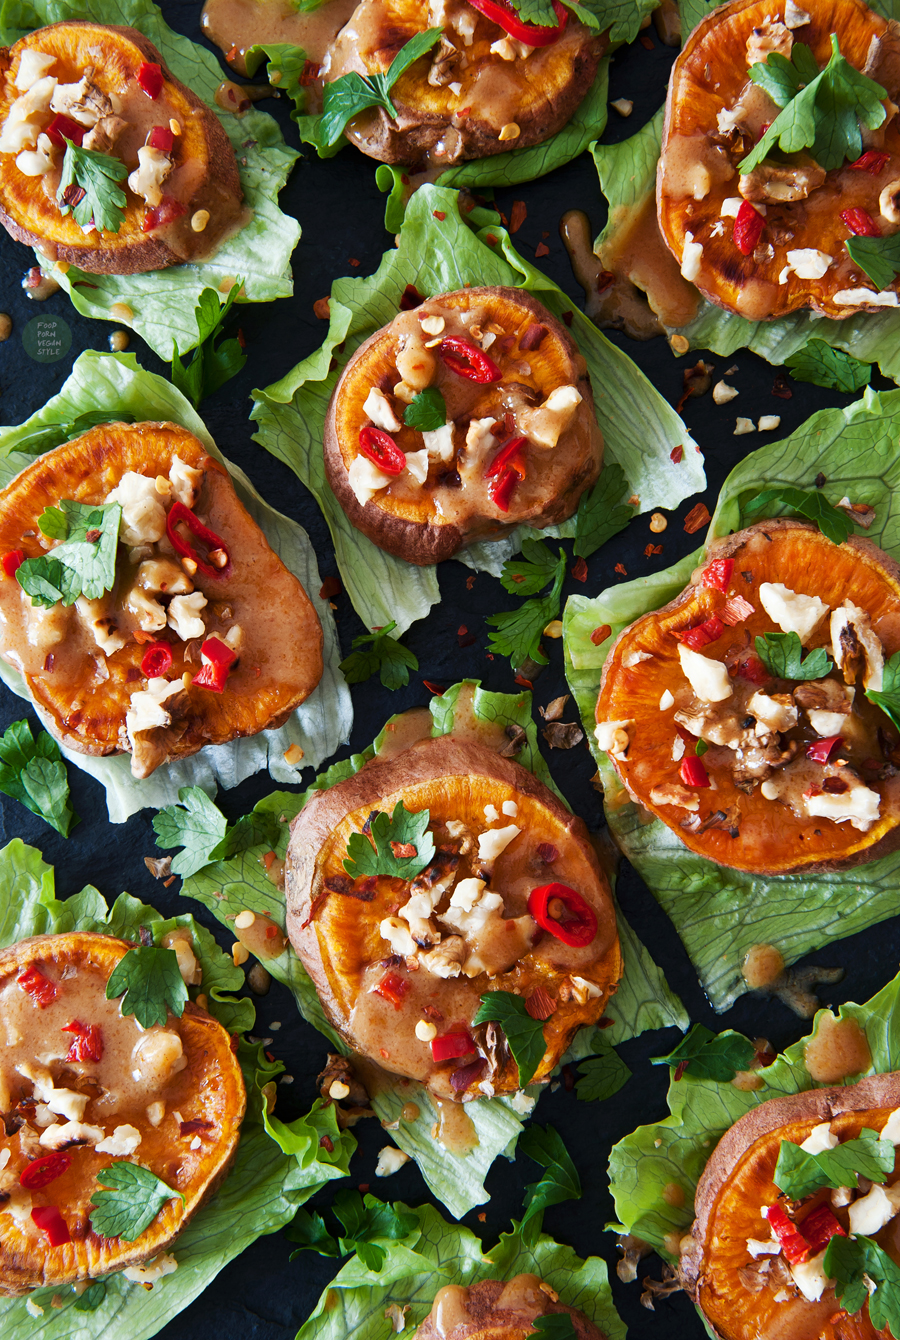 Baked sweet potato canapes with salty miso drizzle and crunchy walnut topping